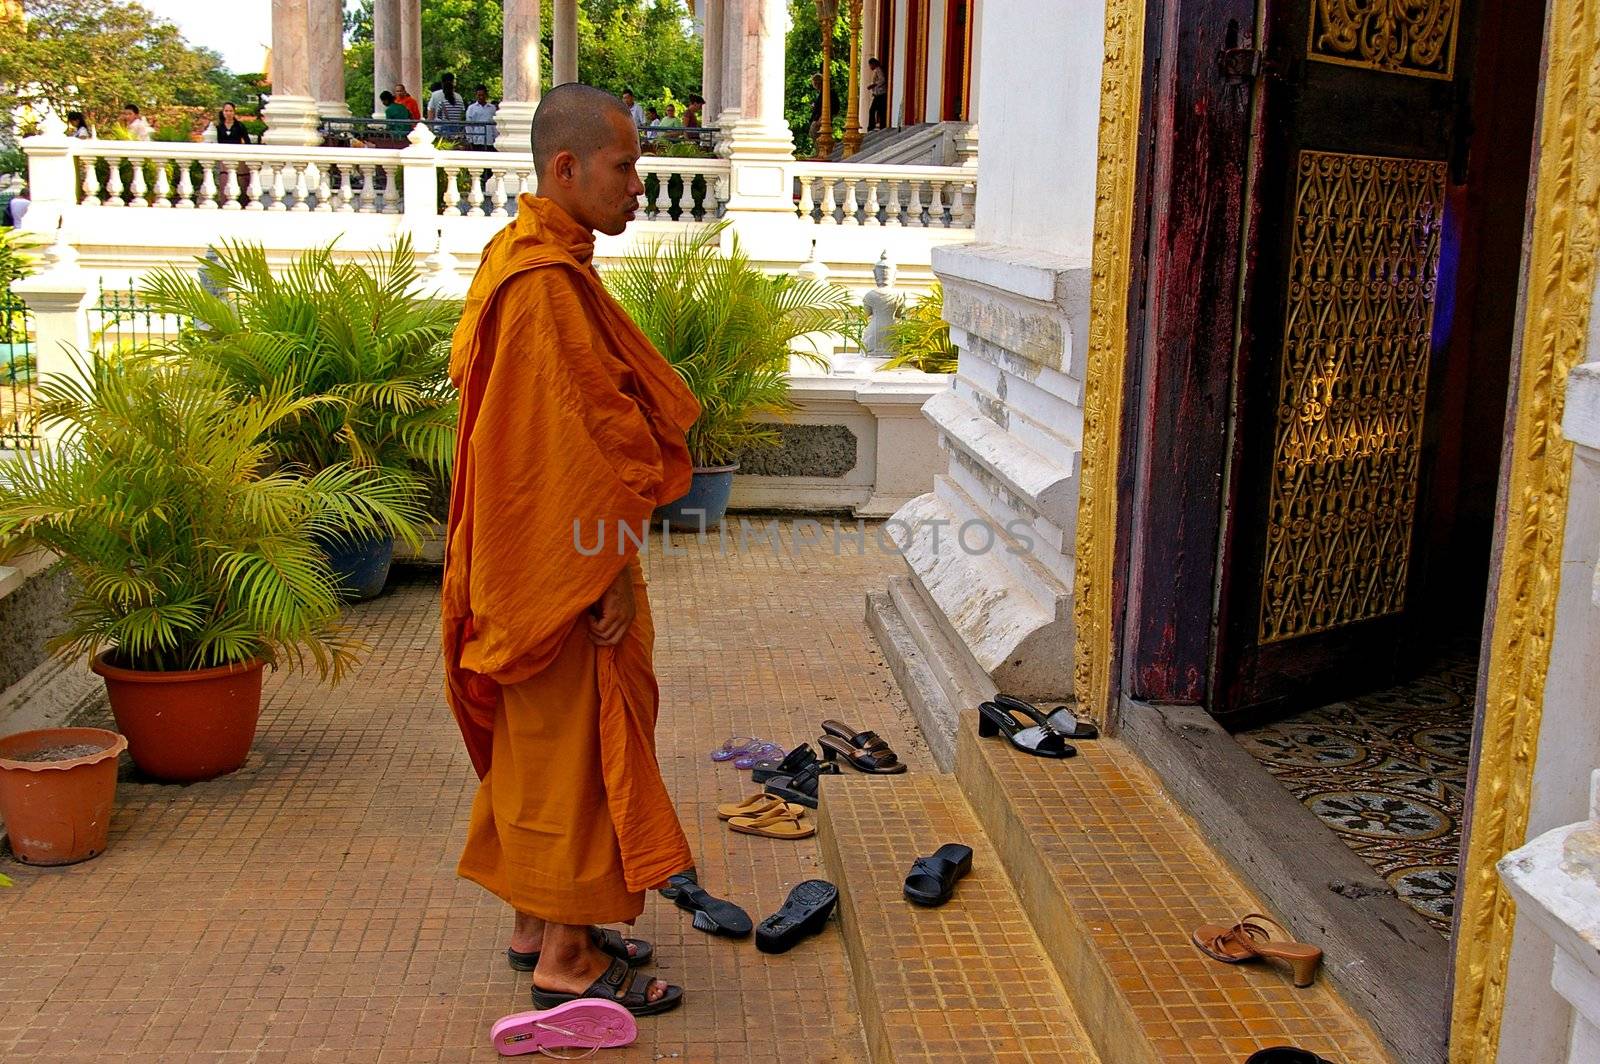 A Buddhist monk entering a place of worship at the Royal Palace, Phnom Penh, Cambodia.